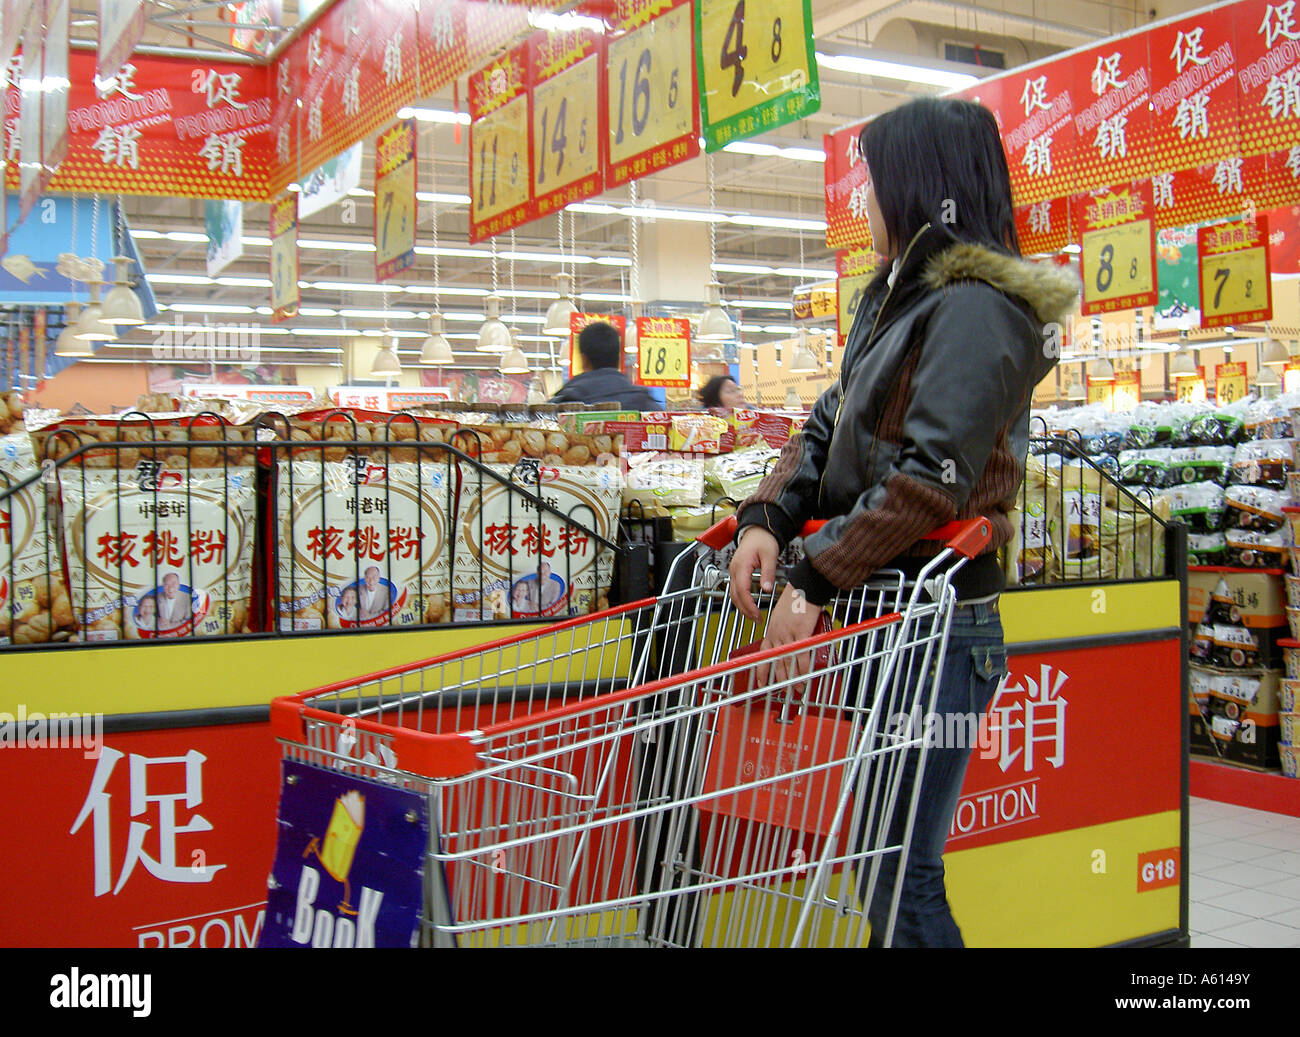 Taiwanese KT Mart store in city of Jinan, Shandong Province, China. Supermarket interior aisle shopper with trolley Stock Photo